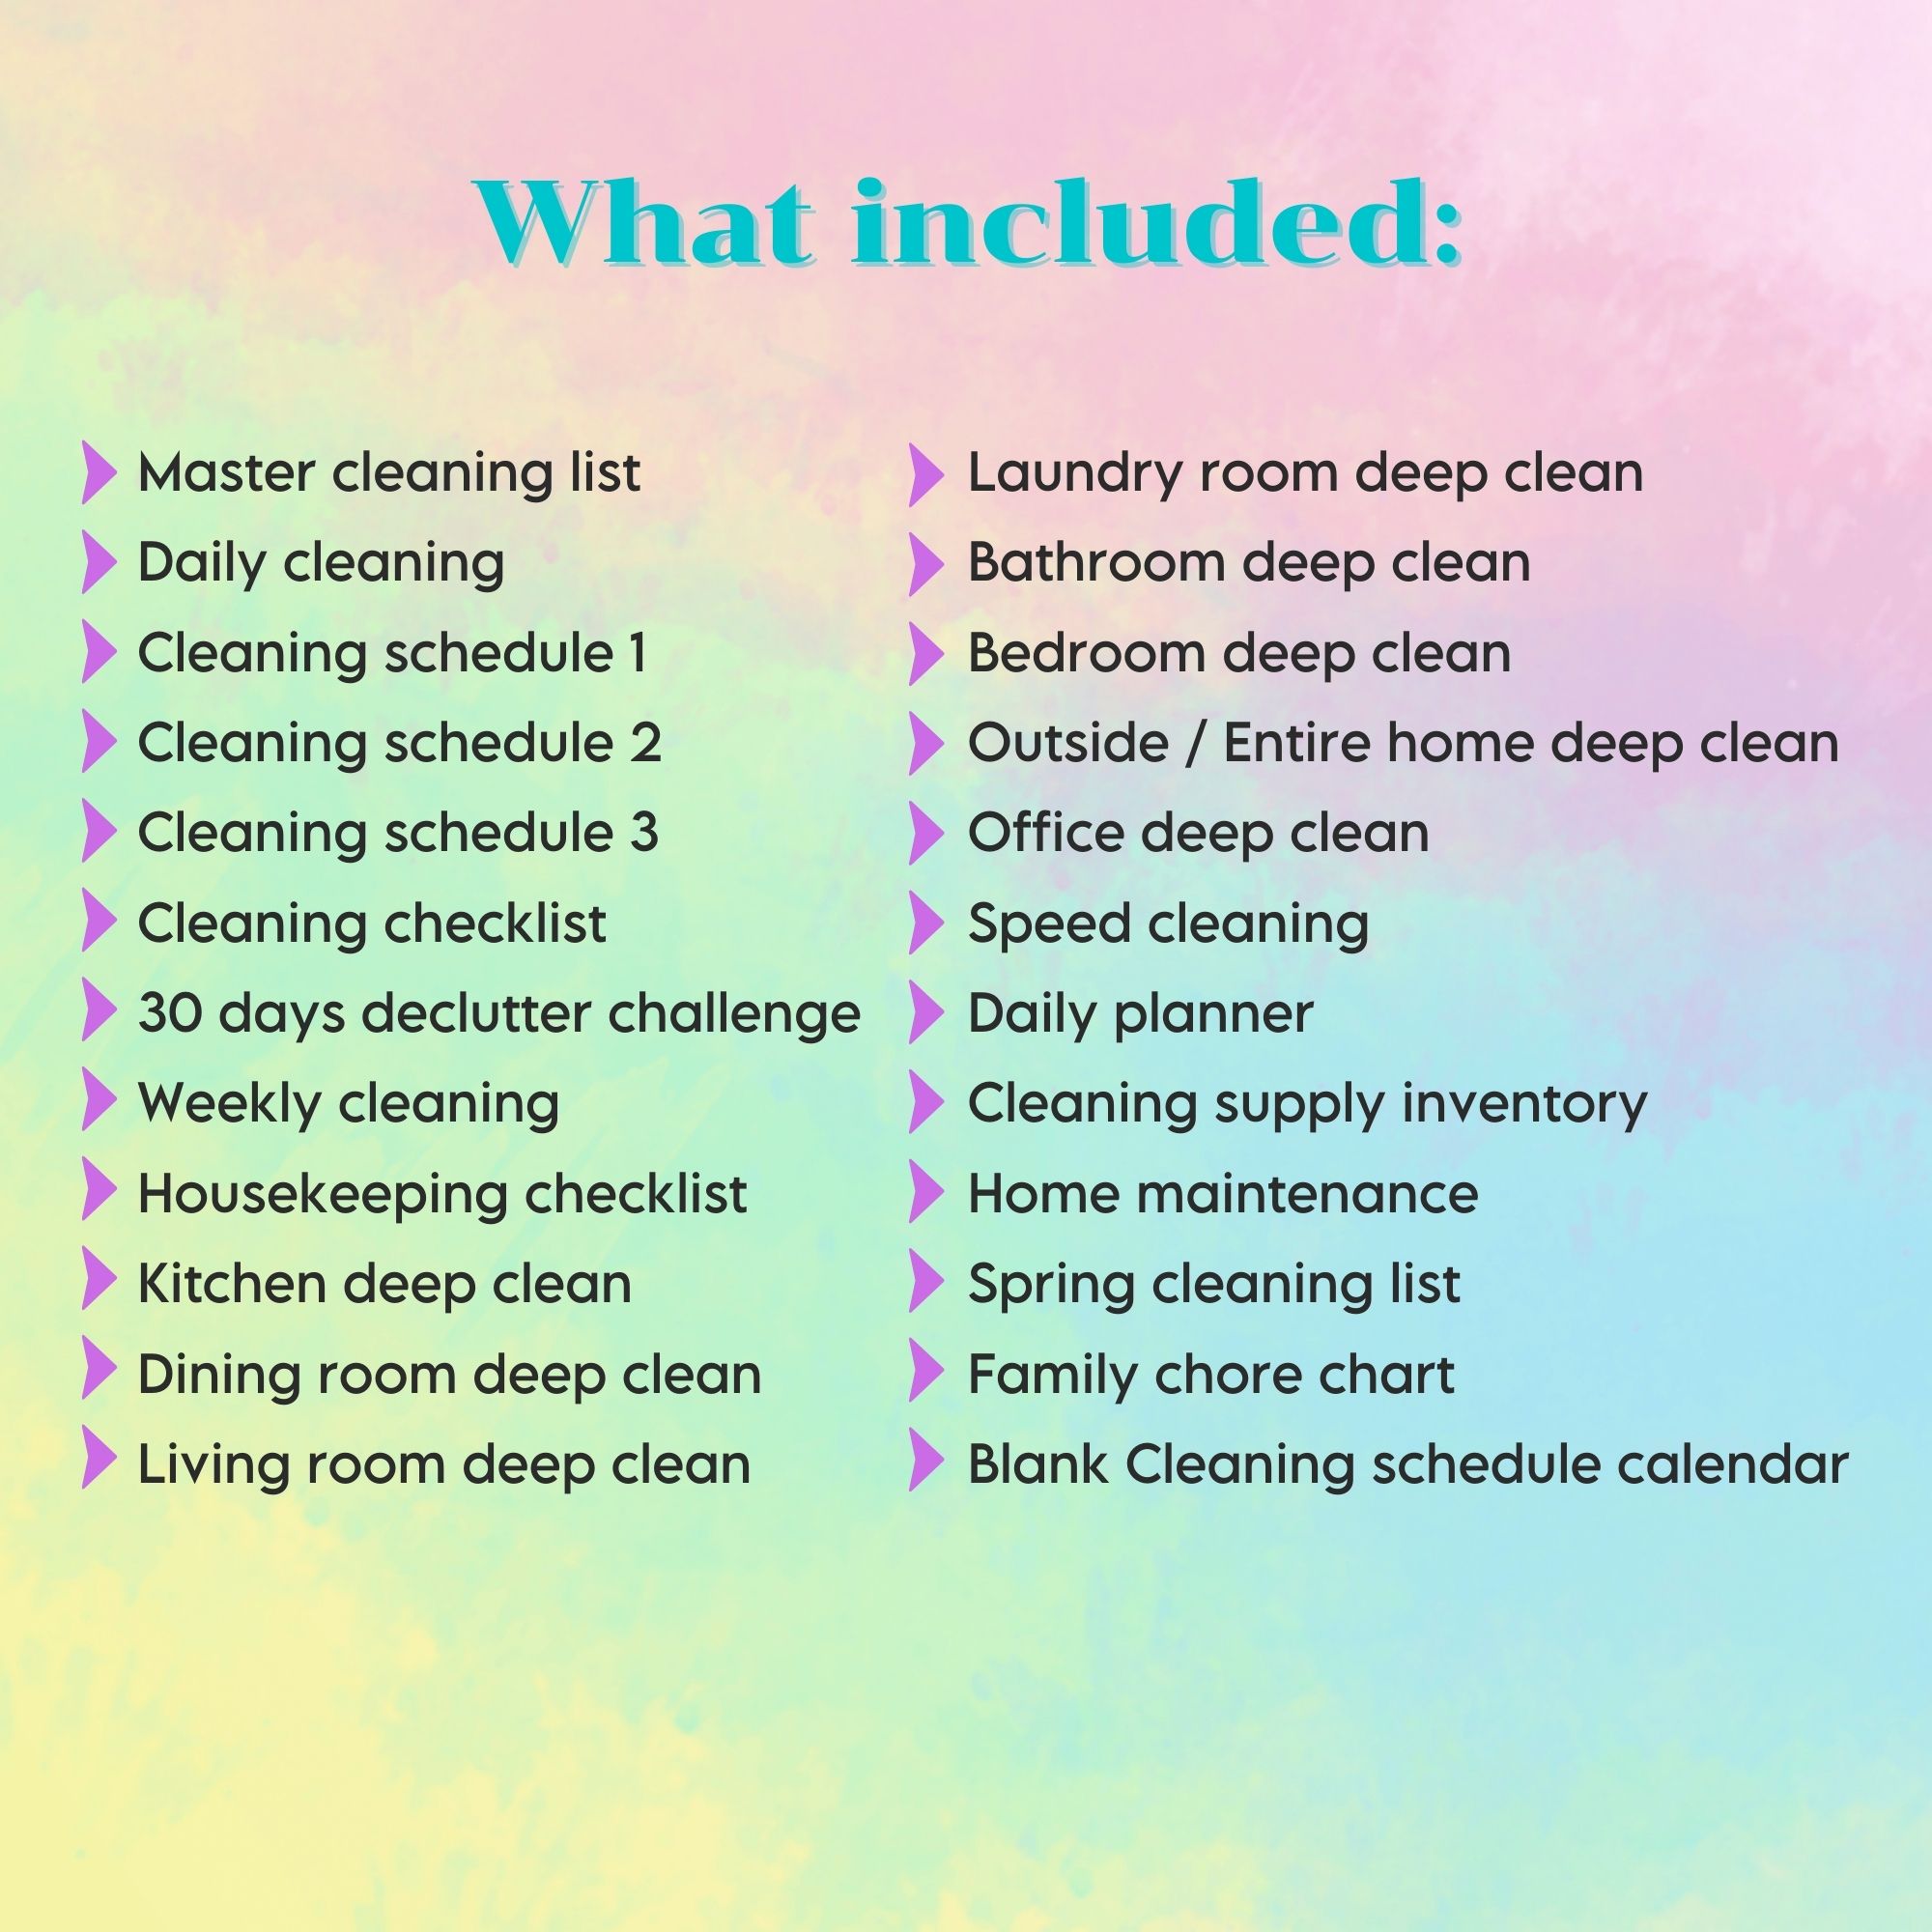 List of cleaning services on a colorful background.